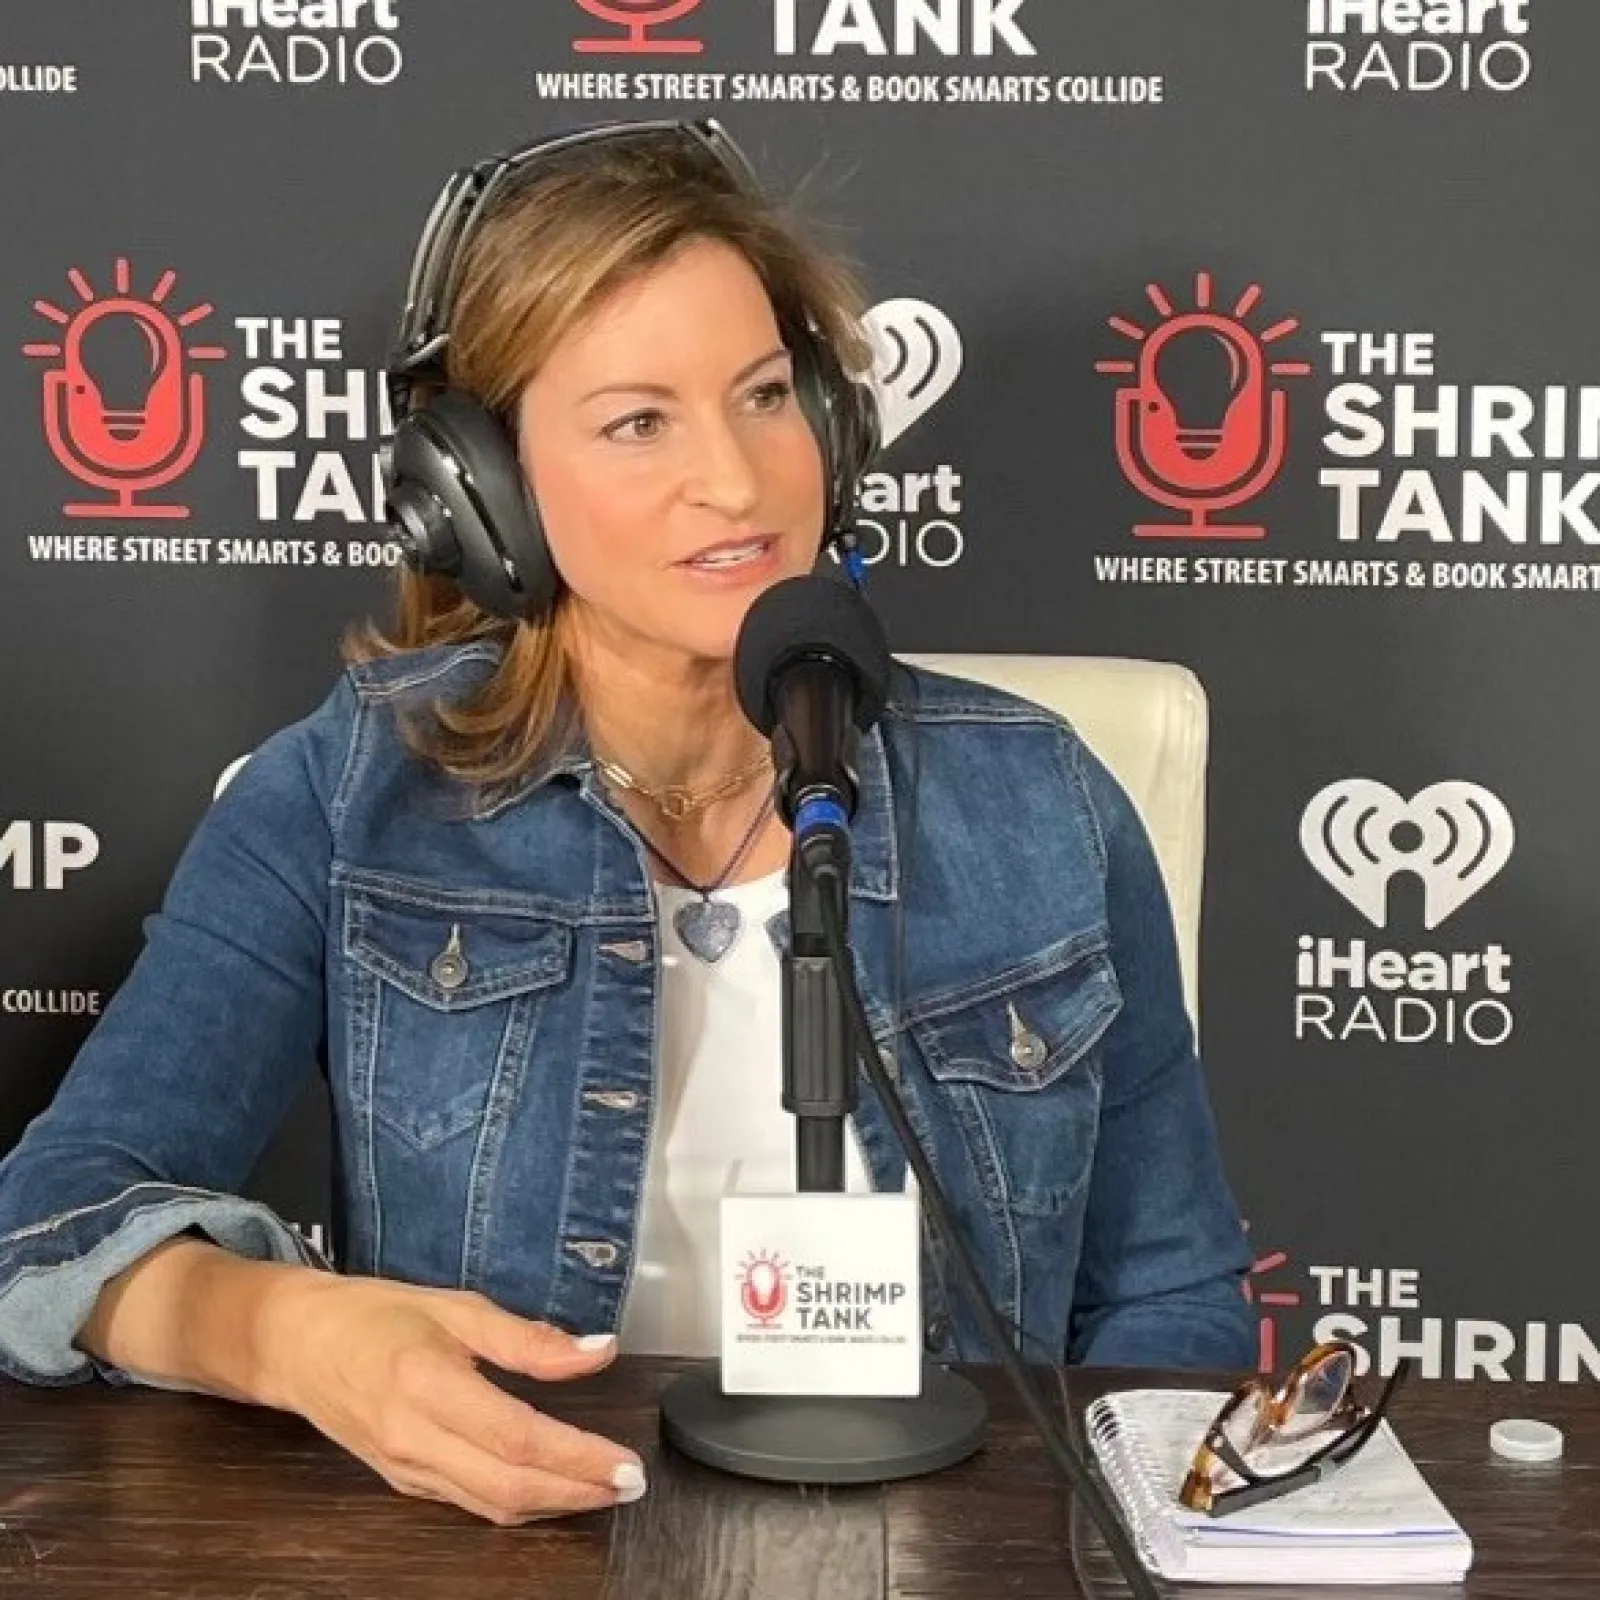 a person sitting at a table with a microphone and a bottle of water